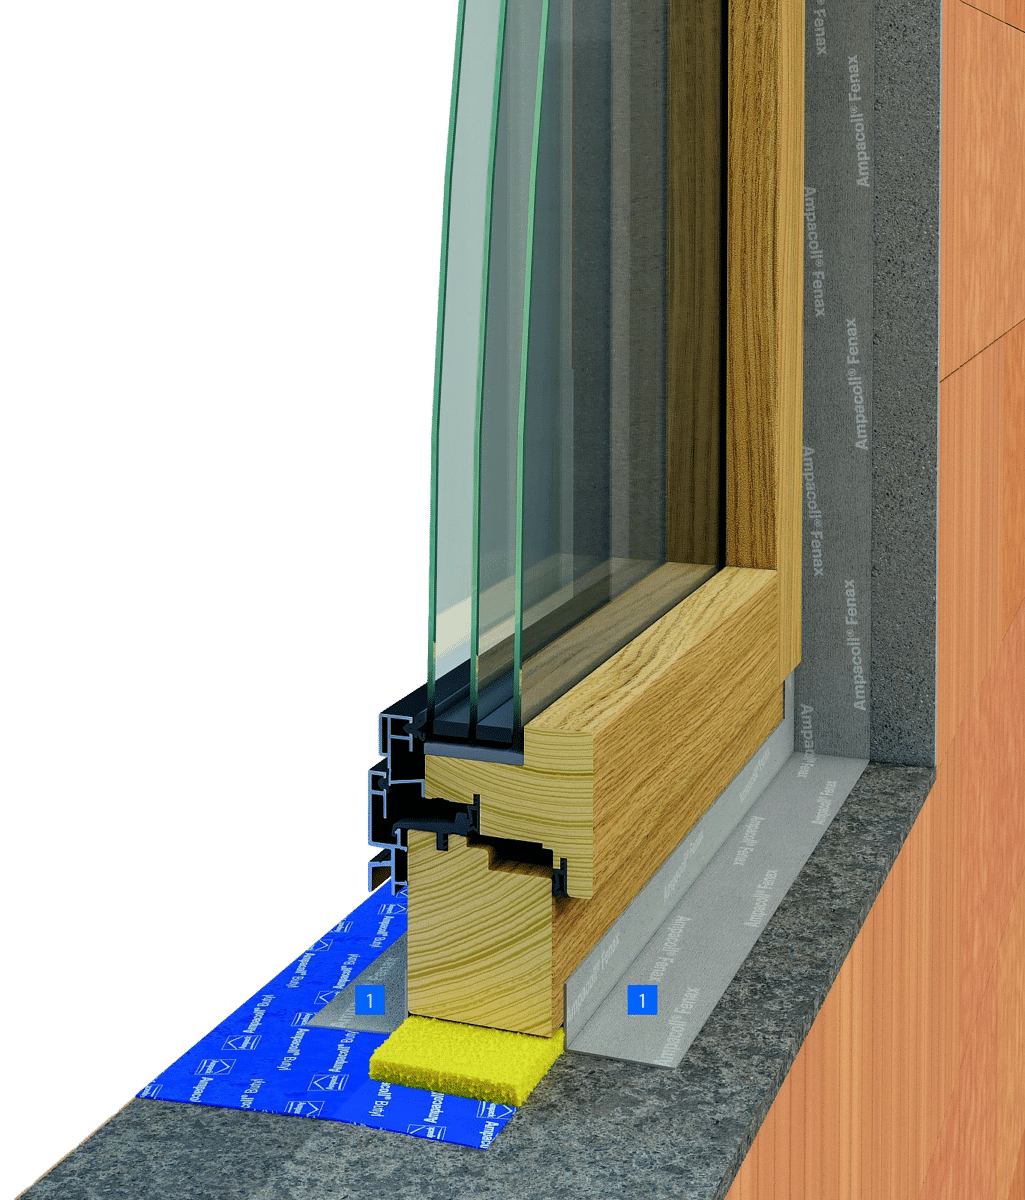 Material in action.

In this example you can see the Ampacoll Fenax tape being used to air seal the interior and weather seal the exterior faces of the window frame. In addition to this you can also see how the Ampacoll SillSkin tape is used to seal the outer sill and the Ampacoll Komprimax insulates around the perimeter of the window, between the frame and the masonry opening.

For more information on how to professionally seal windows and doors, see the Ampack Window Installation Guide.